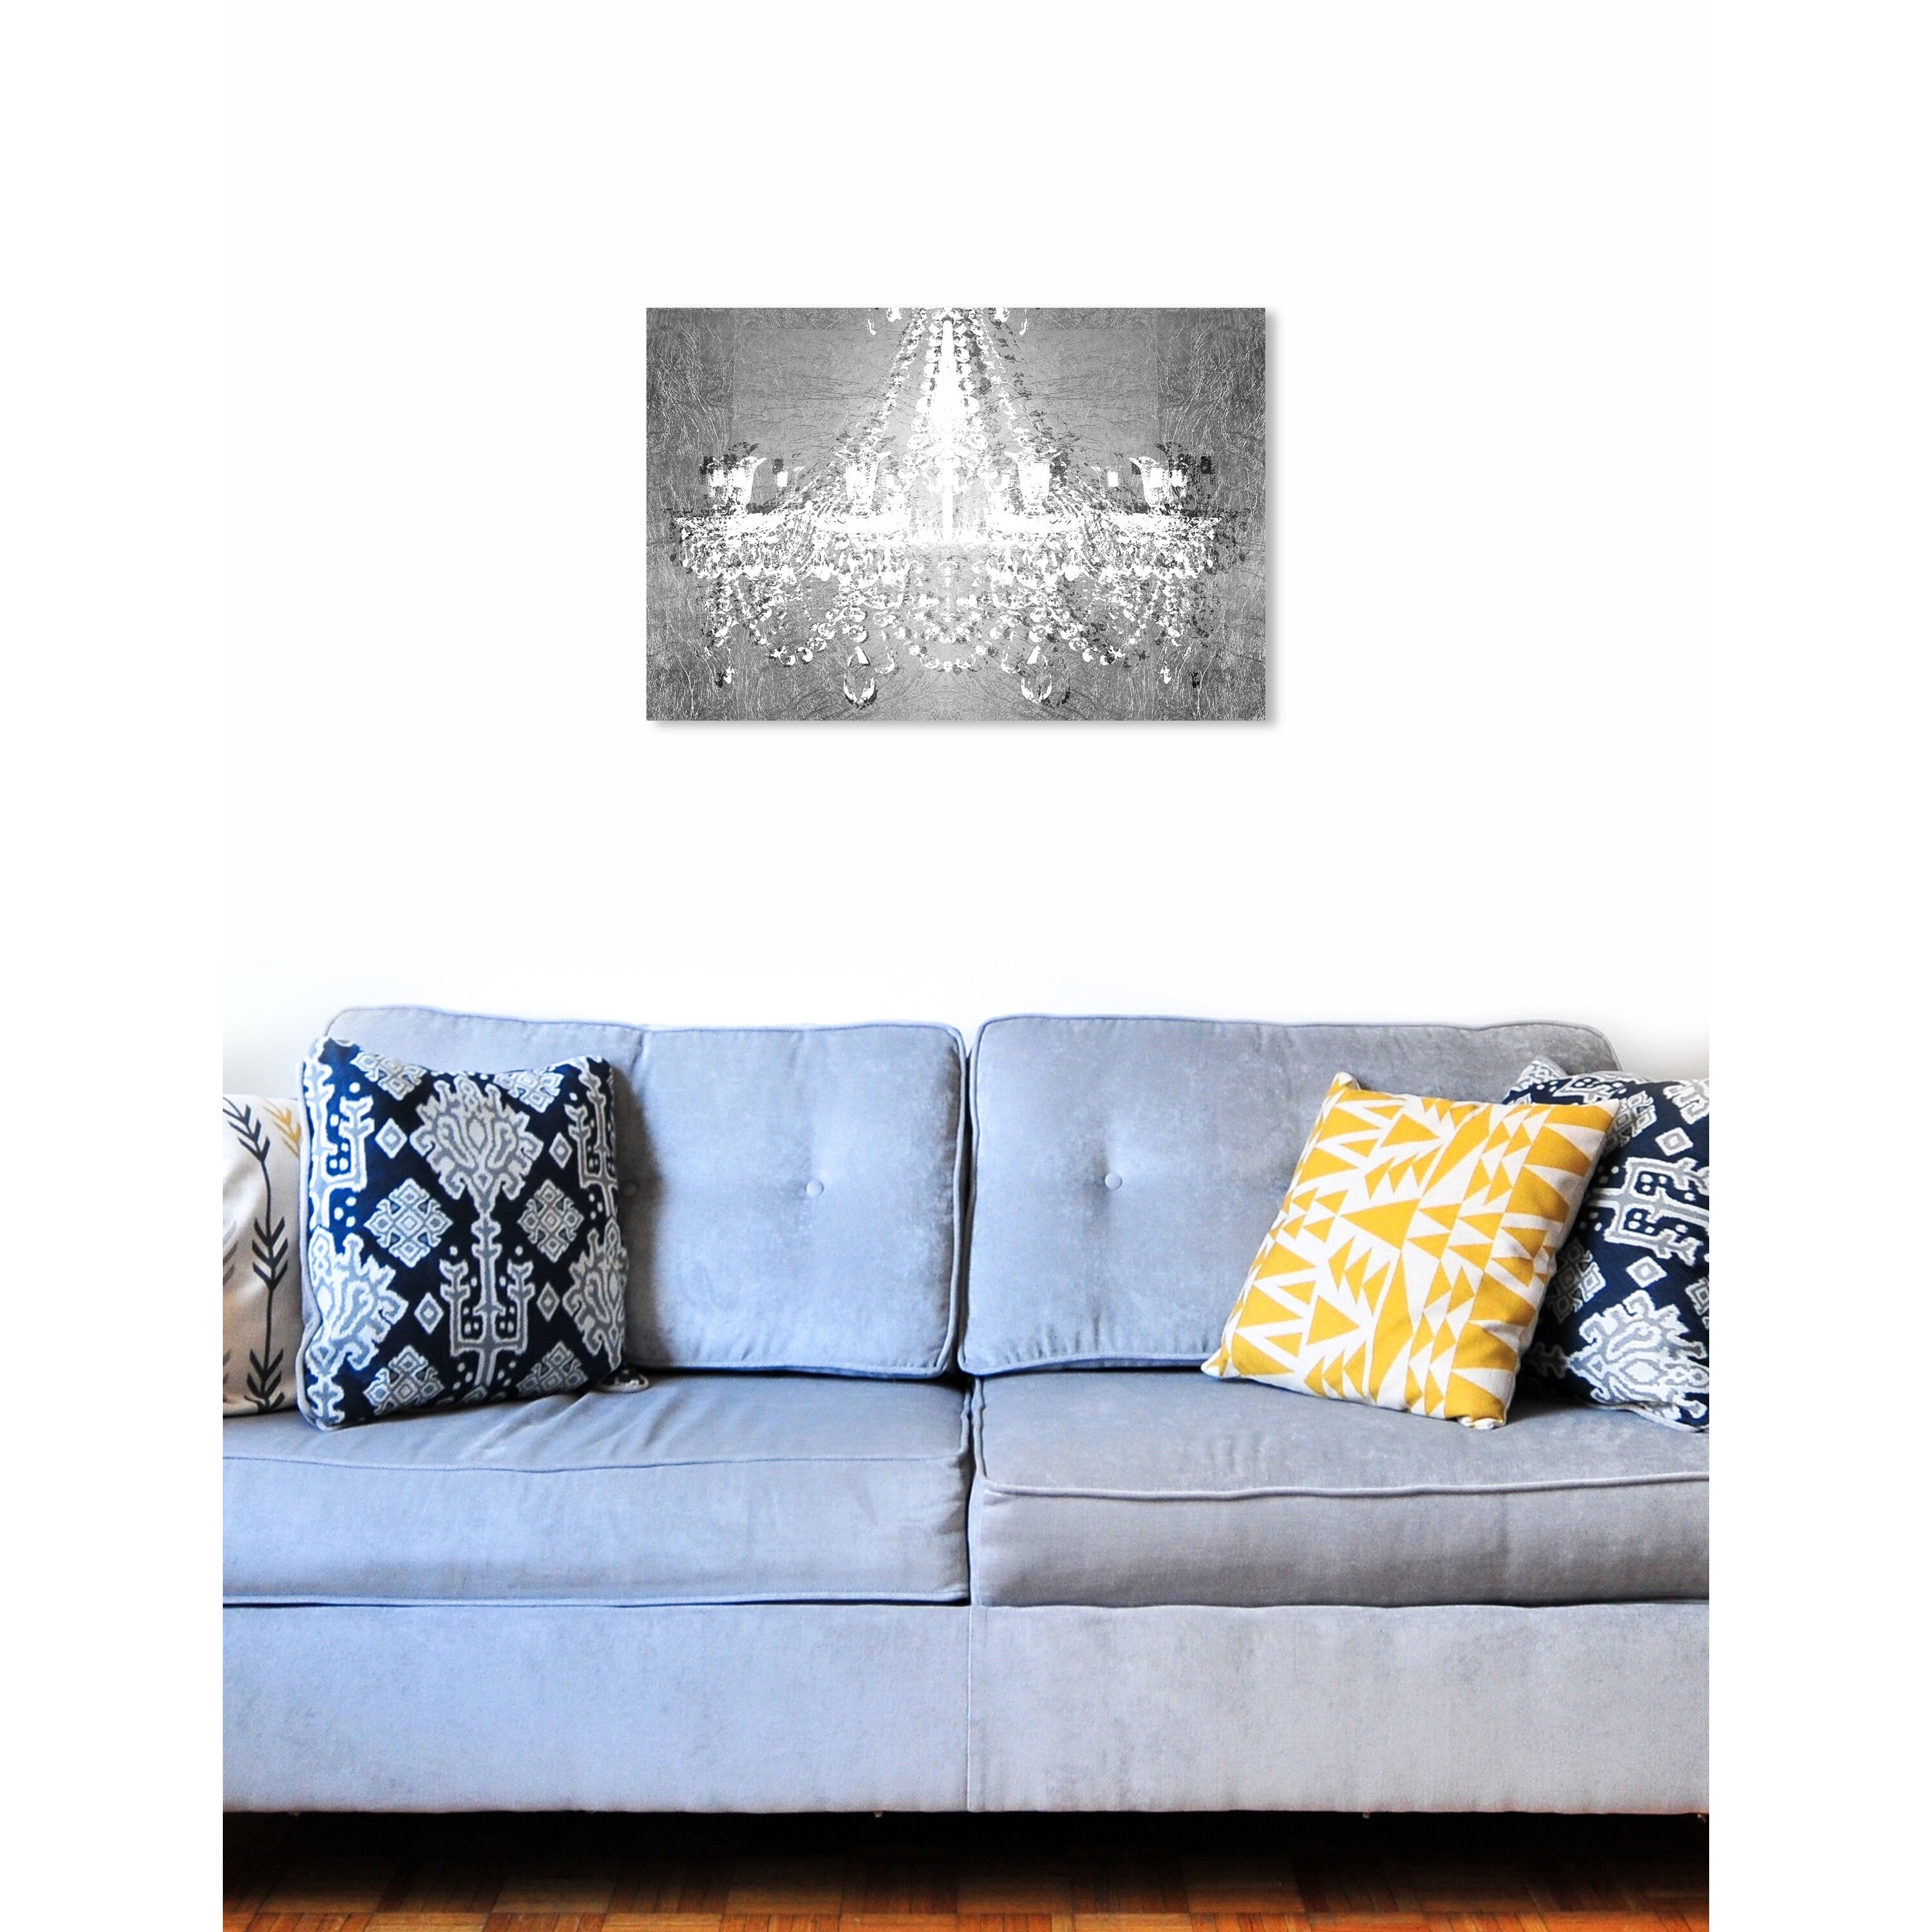 Oliver Gal 'Dramatic Entrance Chrome' Gray Glam, Fashion Chandeliers  Gallery Wrapped Canvas Art